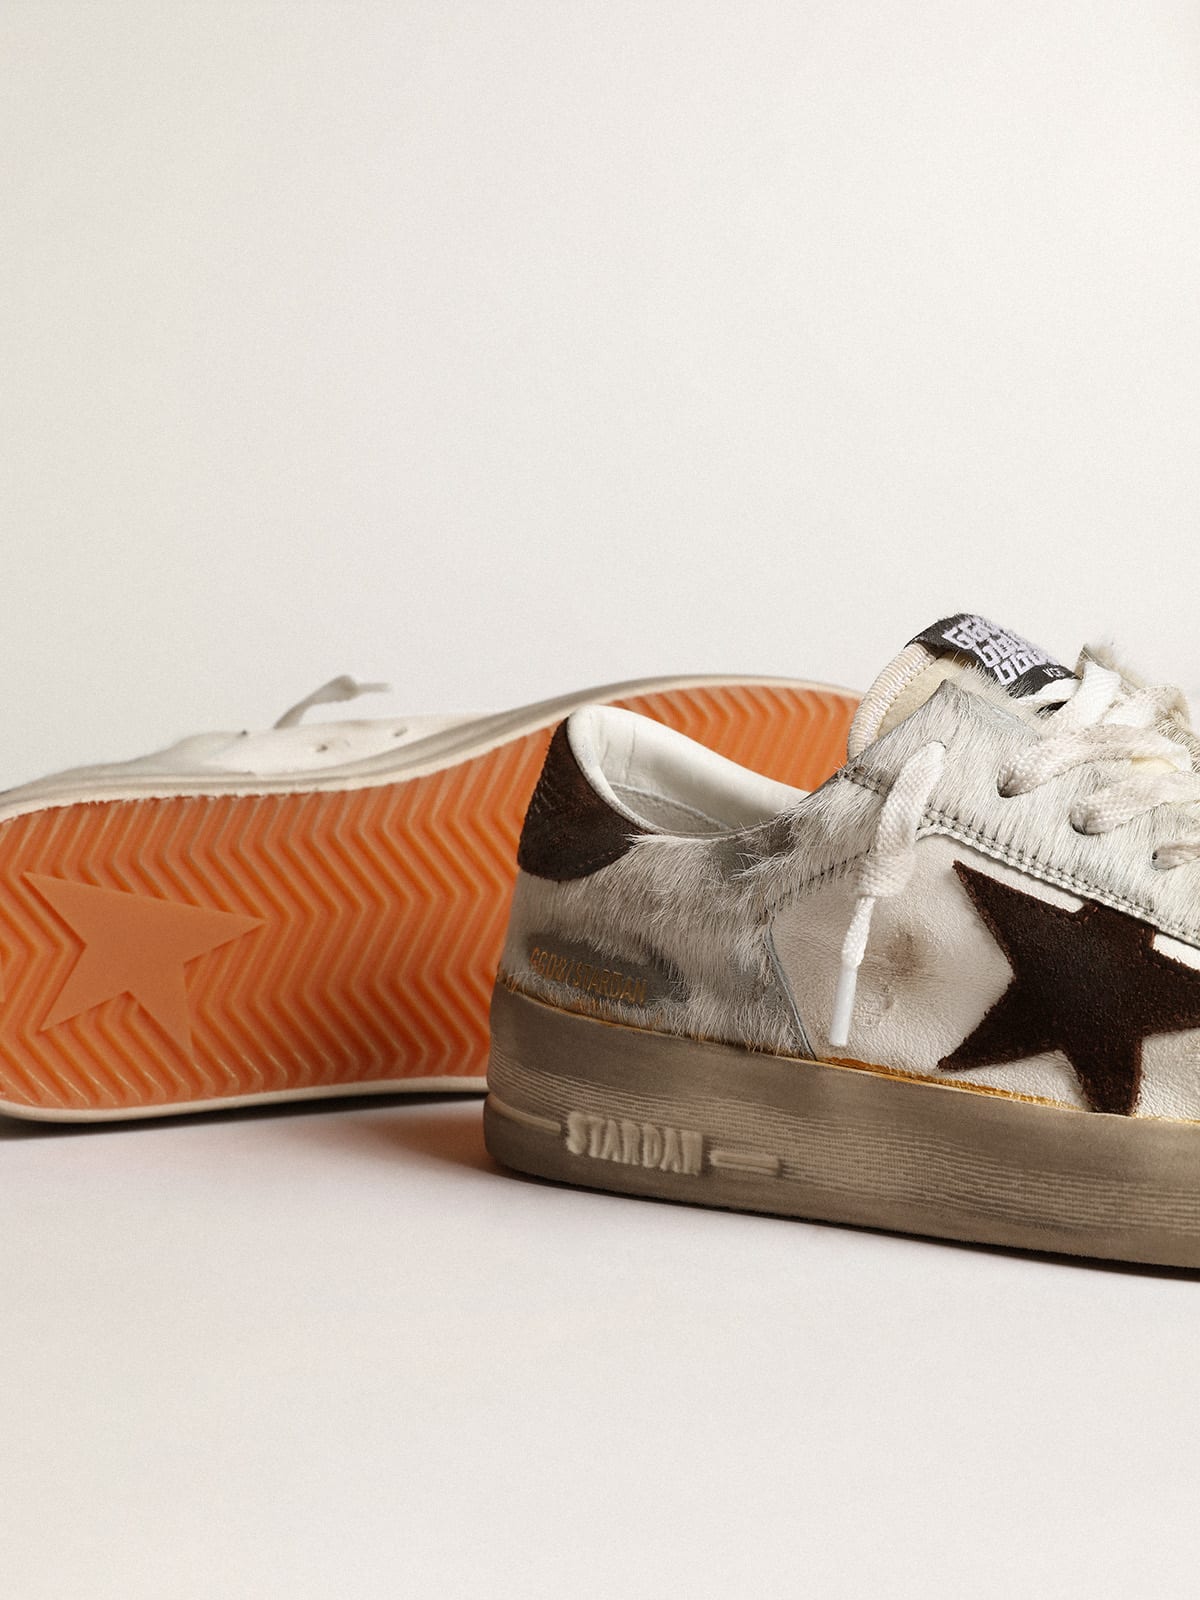 Golden Goose - Women’s Stardan in nappa and pony skin with brown suede star in 